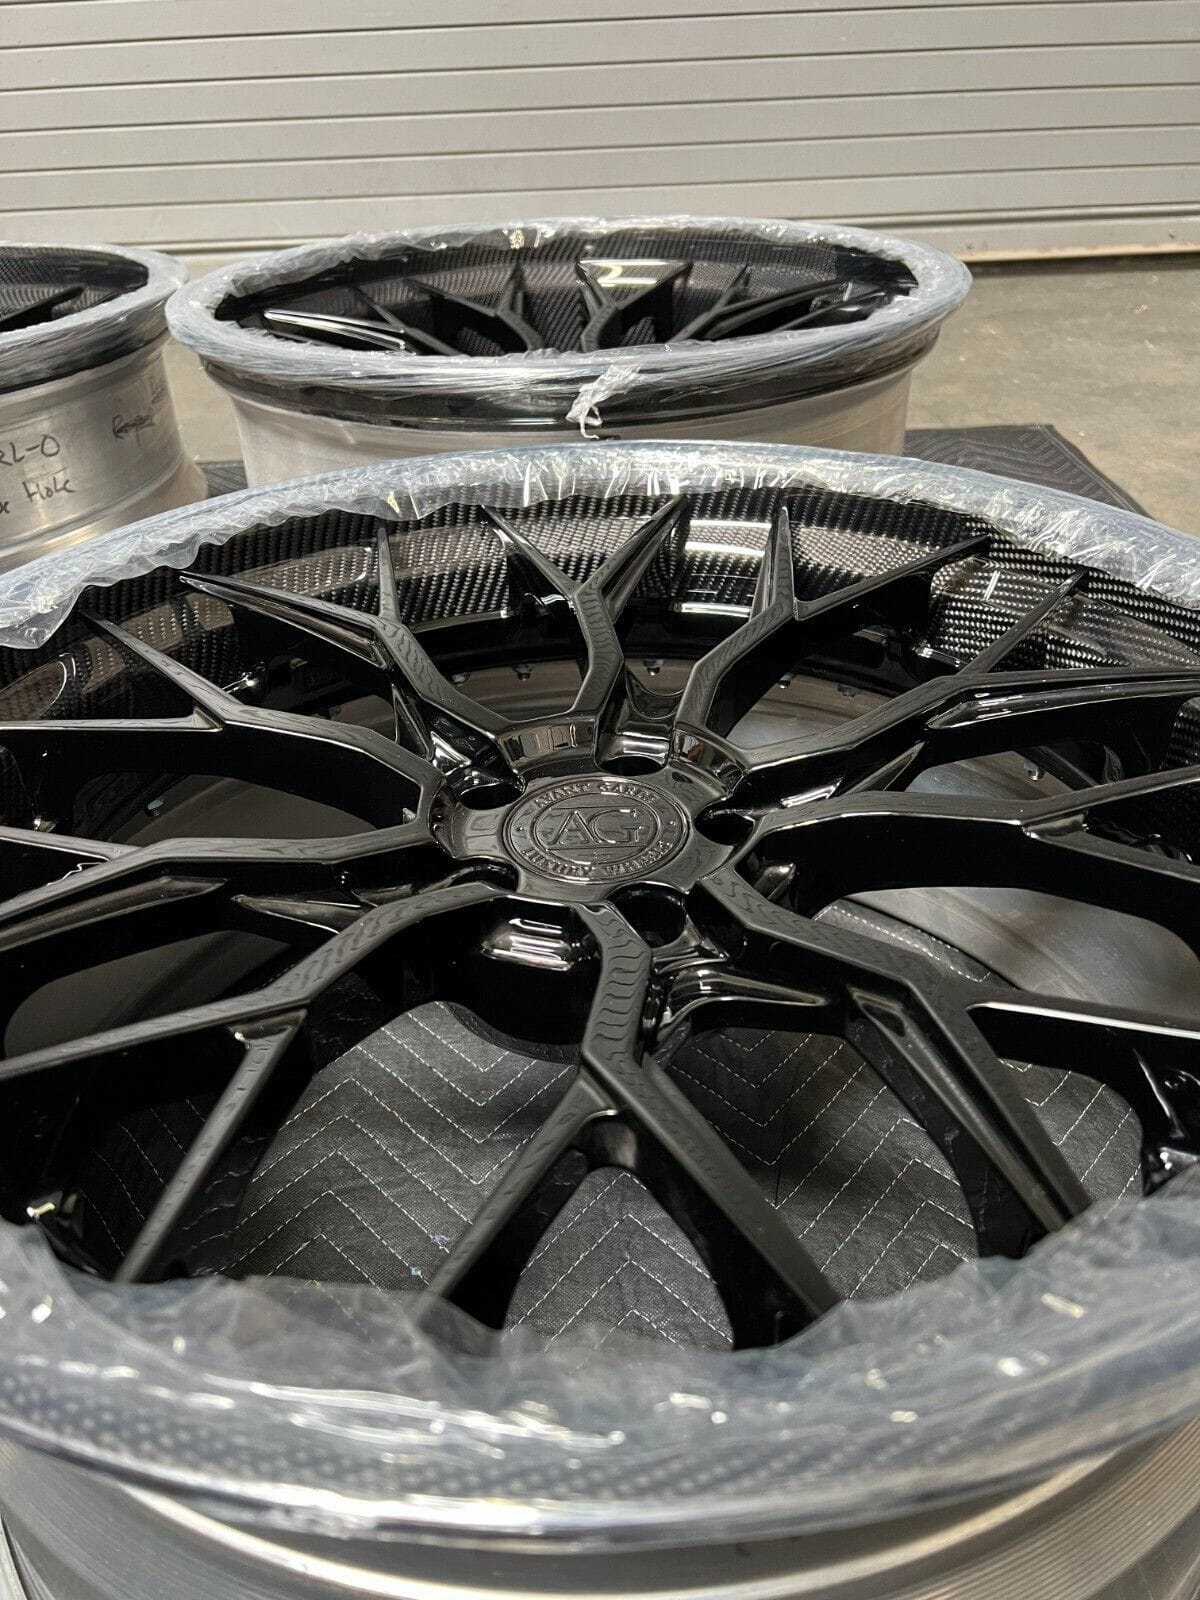 Wheels and Tires/Axles - Brand New Set of AGL43 Forged Wheels IN STOCK - New - 0  All Models - Las Vegas, NV 89118, United States